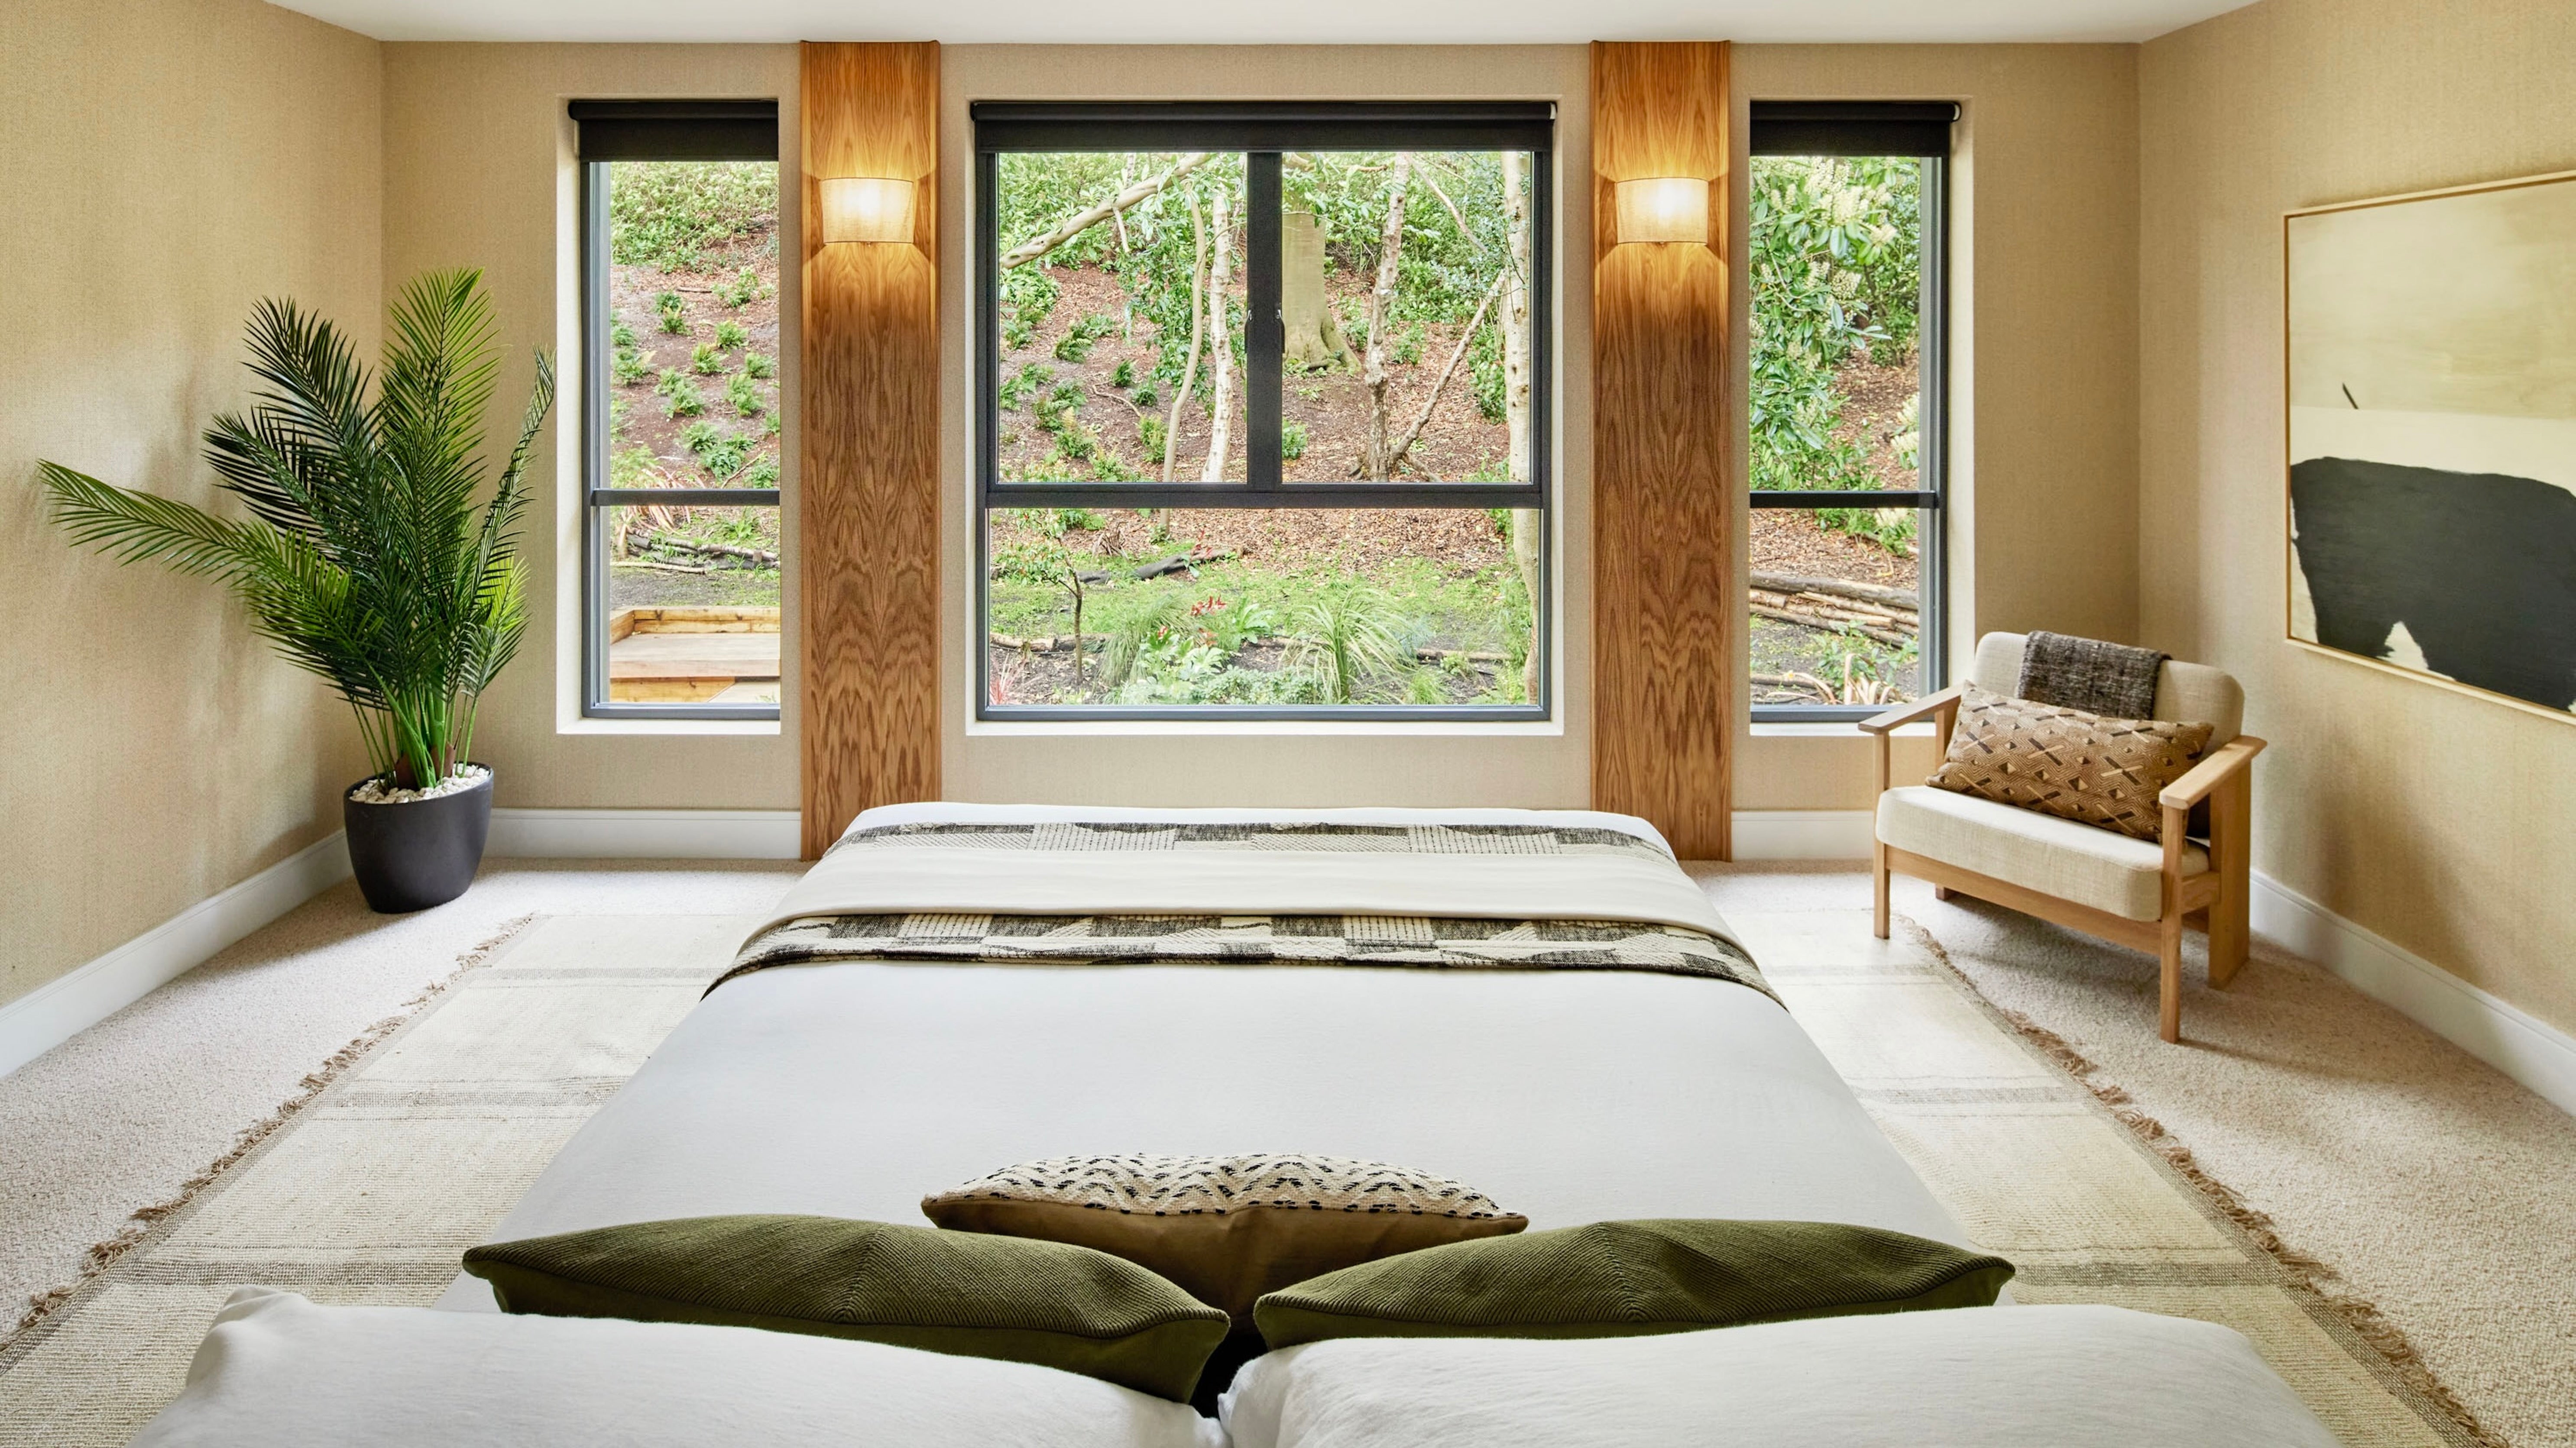 <p><strong>Main Bedroom</strong></p><p>Warming taupe walls, white linen bed sheets and illuminated timber cladding create a comforting main bedroom with its own garden panorama, dressing room and en suite.</p>